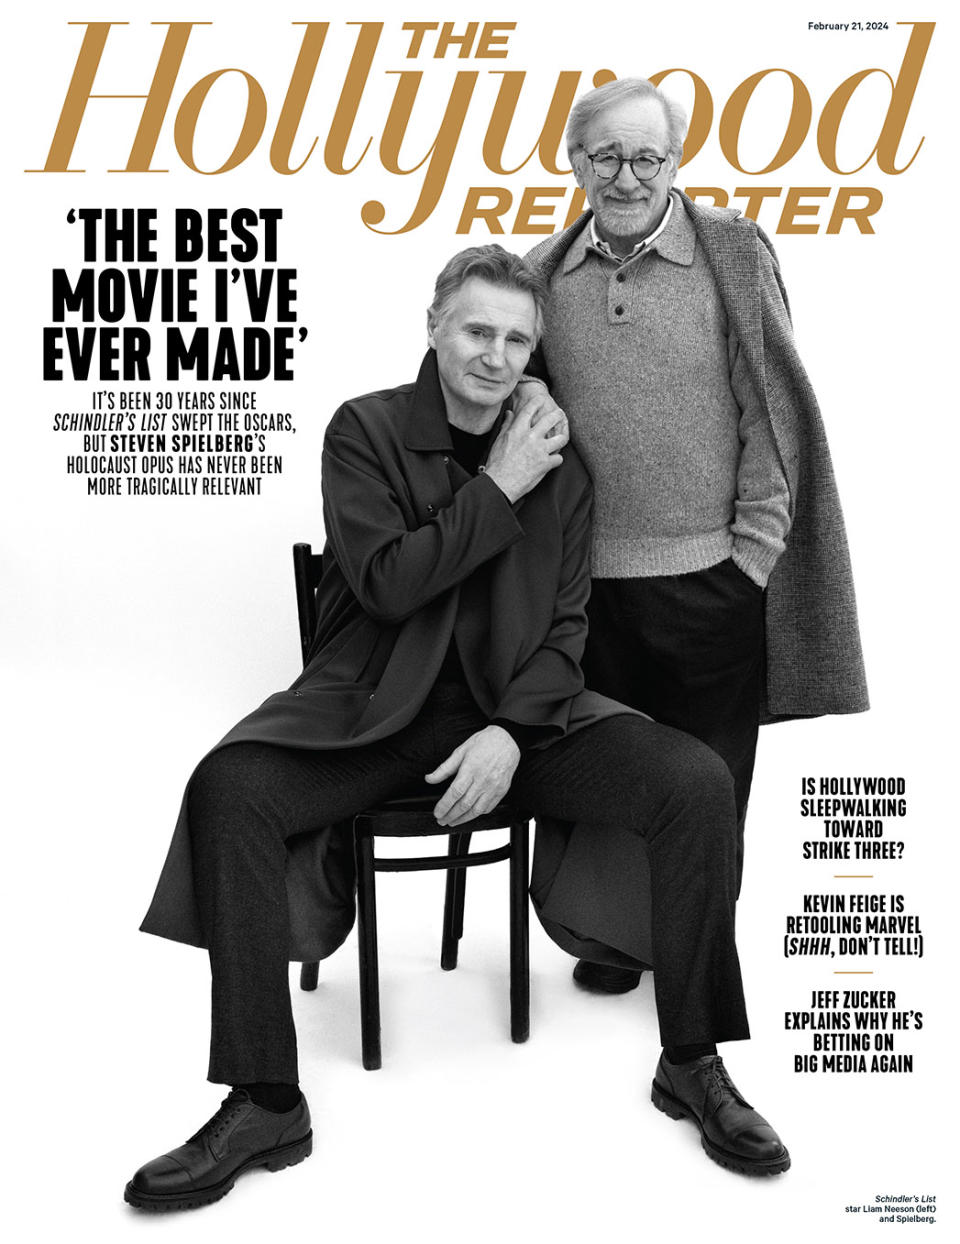 Liam Neeson and Steven Spielberg photographed Jan. 5 at Quixote Studios West Hollywood